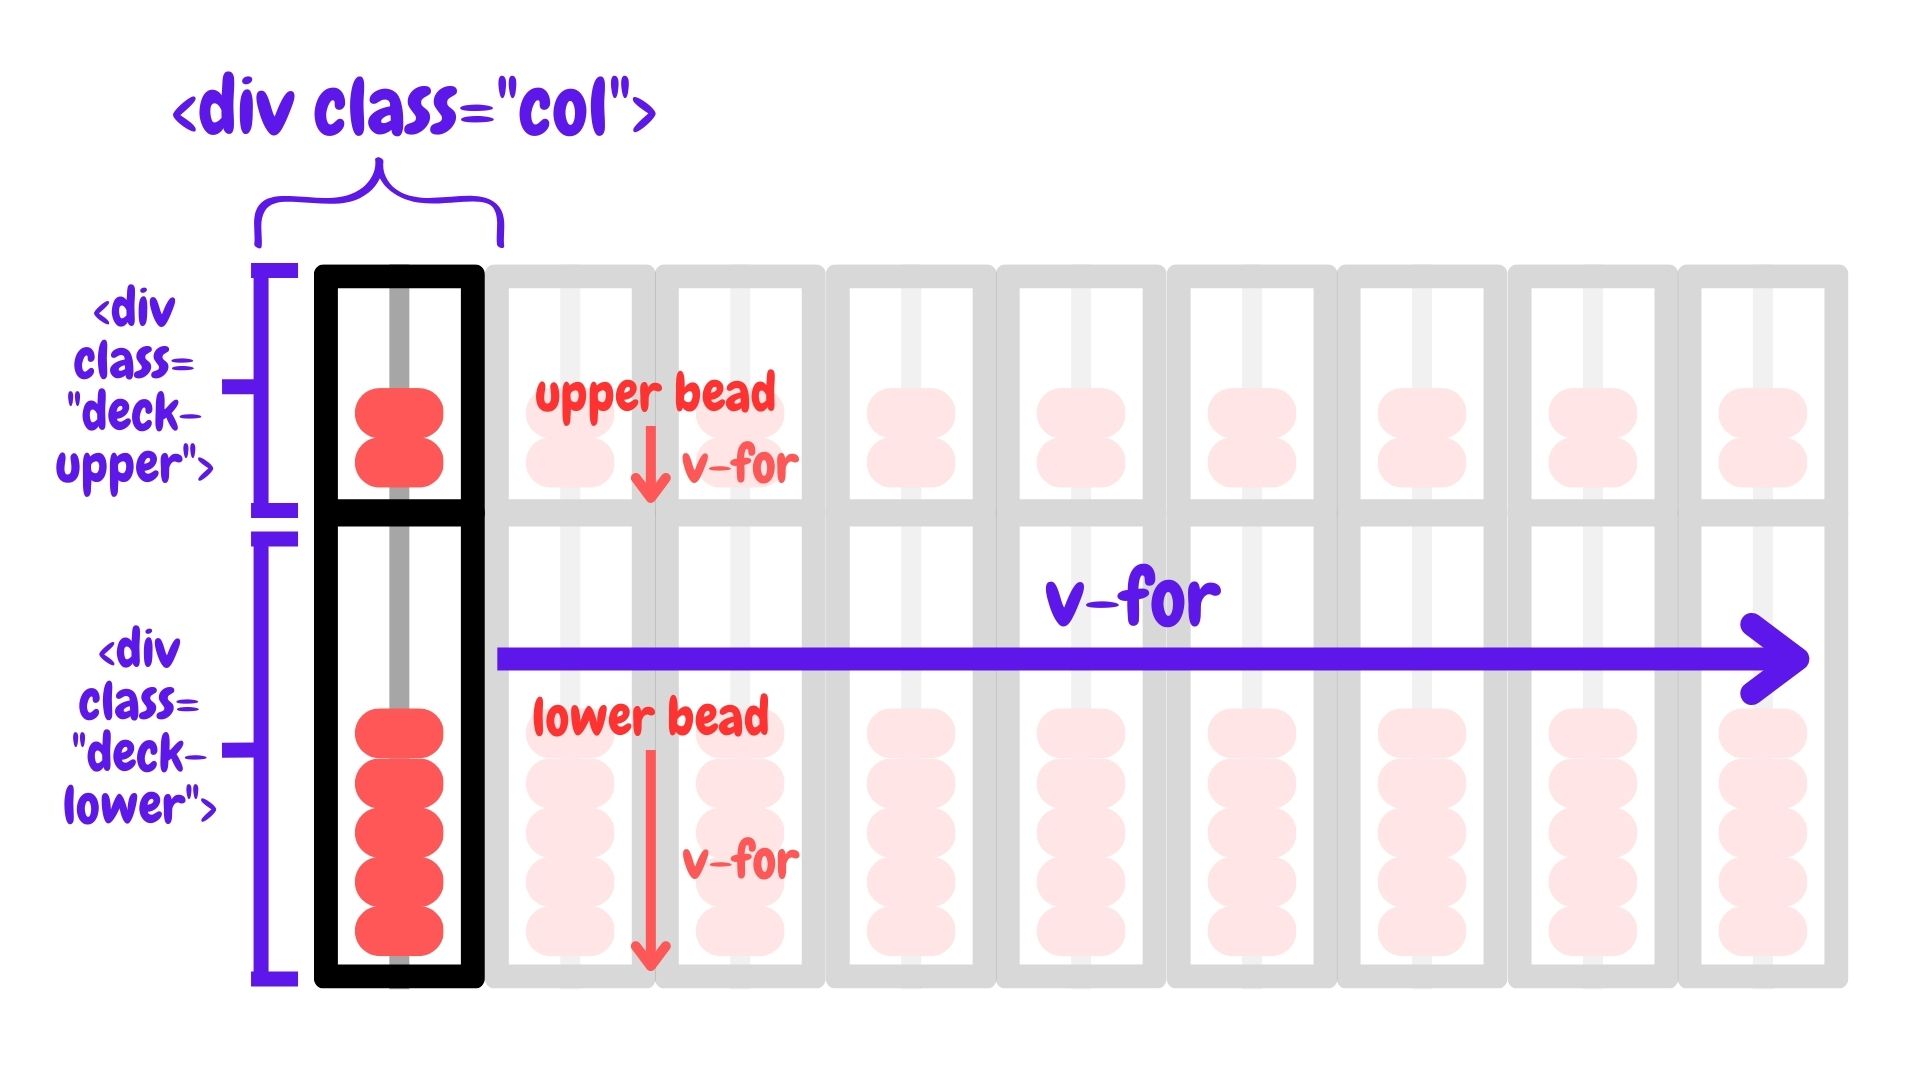 Diagram showing how the abacus is coded by column